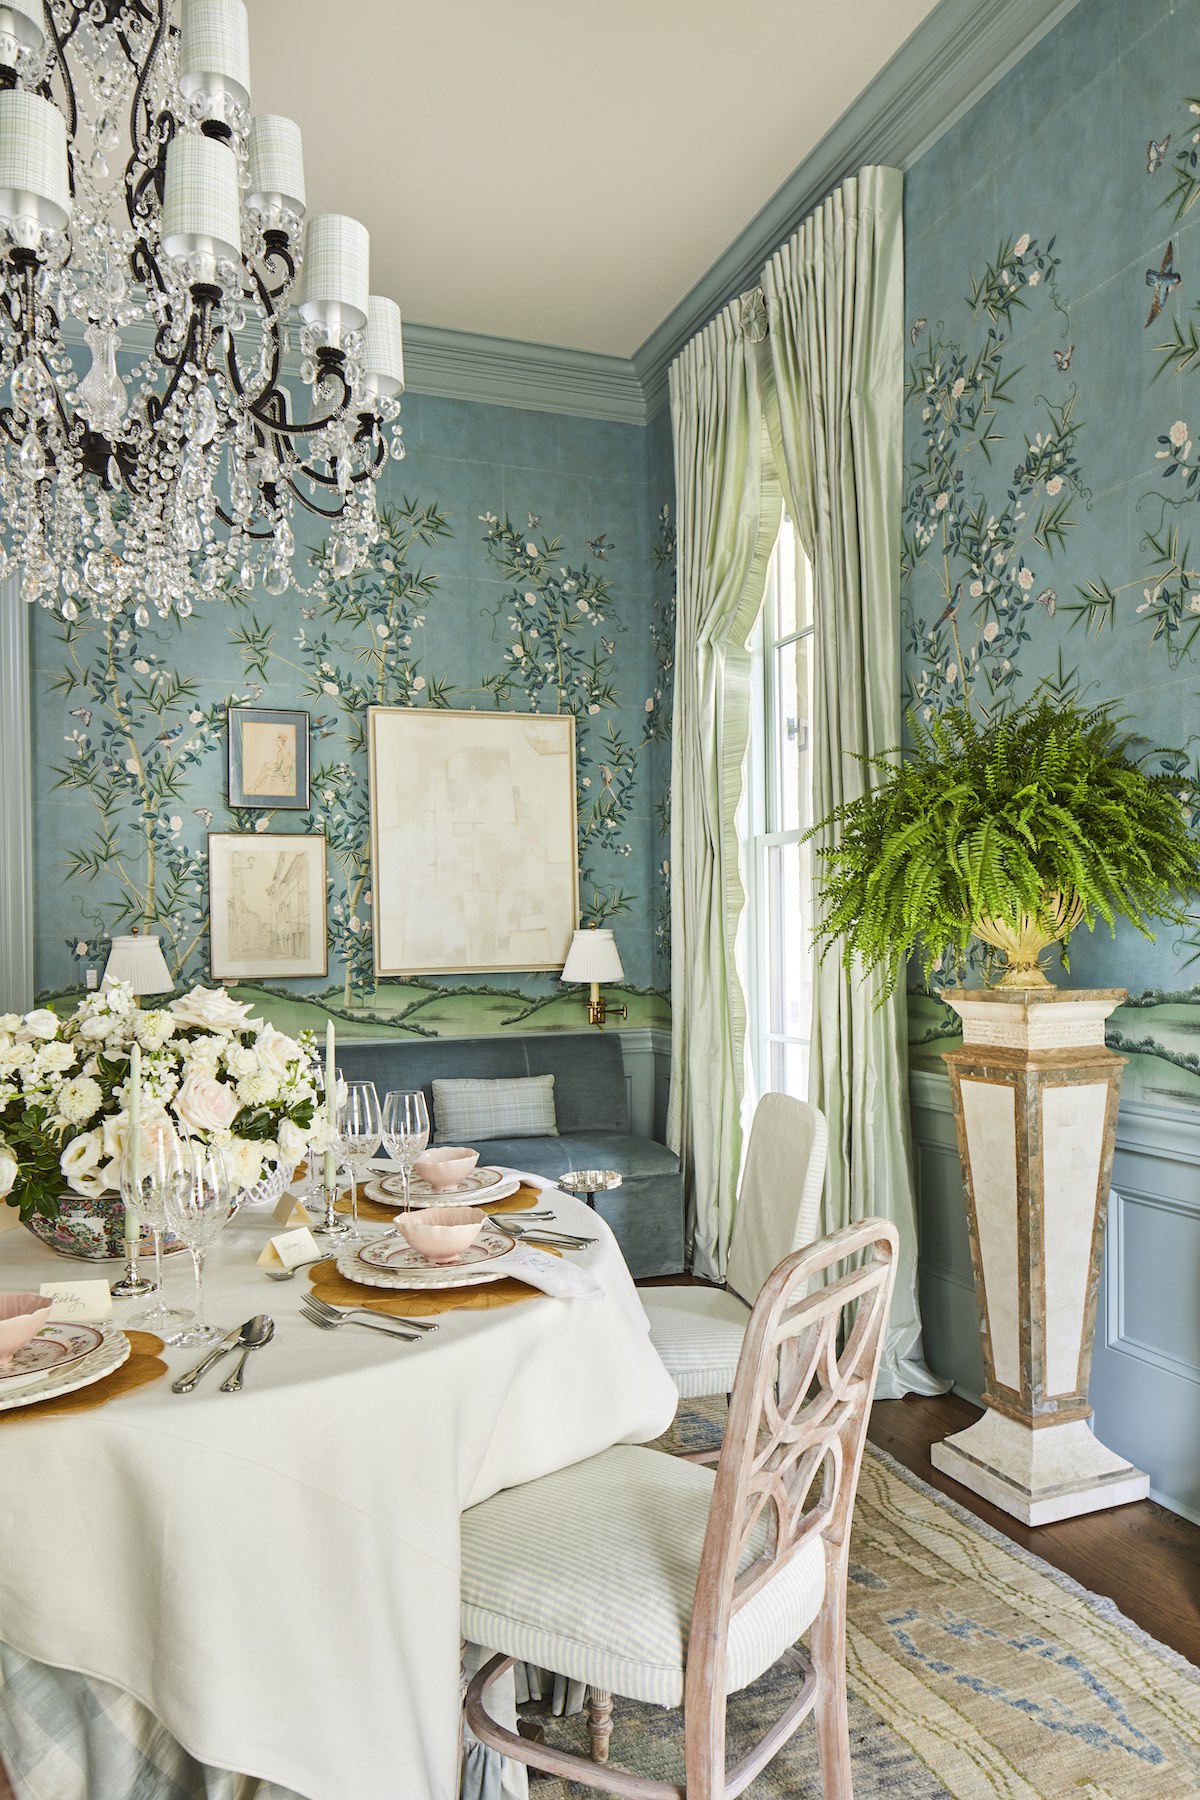 Dining room with table set with china and white flower arrangement. Blue banquette with a pair of brass sconces sits against the wall behind the table.